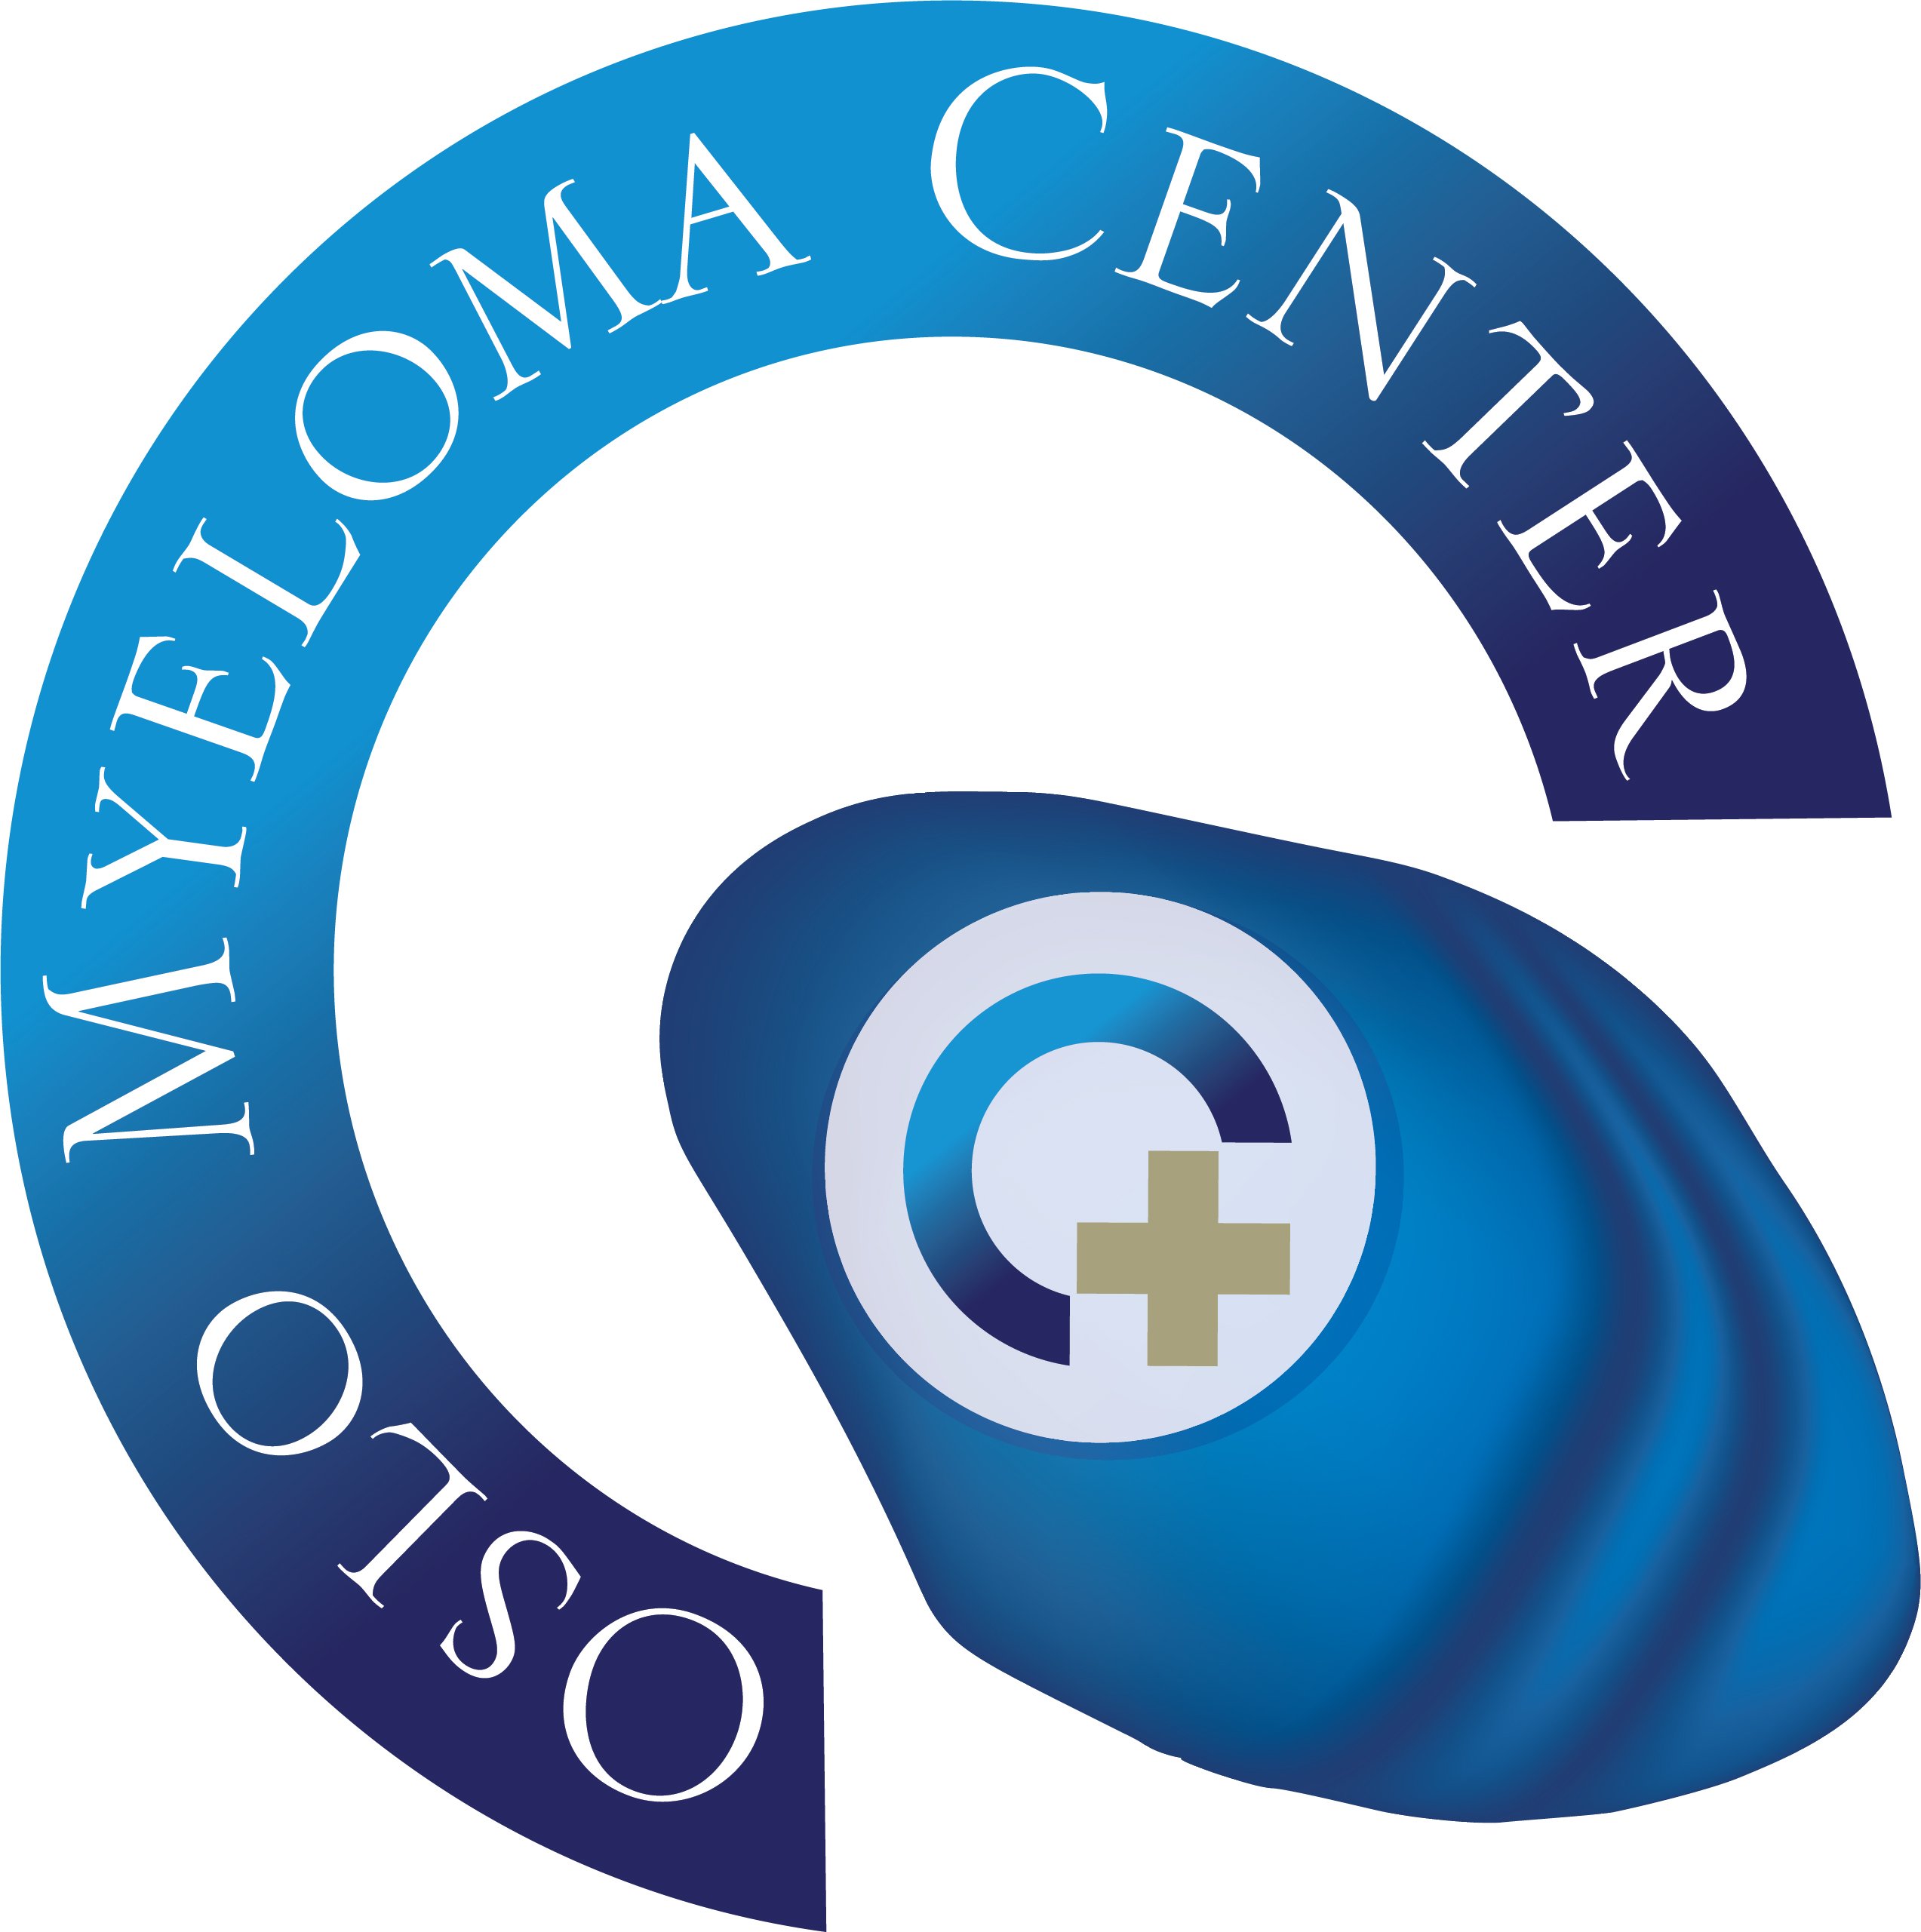 Oslo Myeloma Center is the largest clinical study center for multiple myeloma in the Nordics, with over 100 patients enrolled into clinical trials every year.